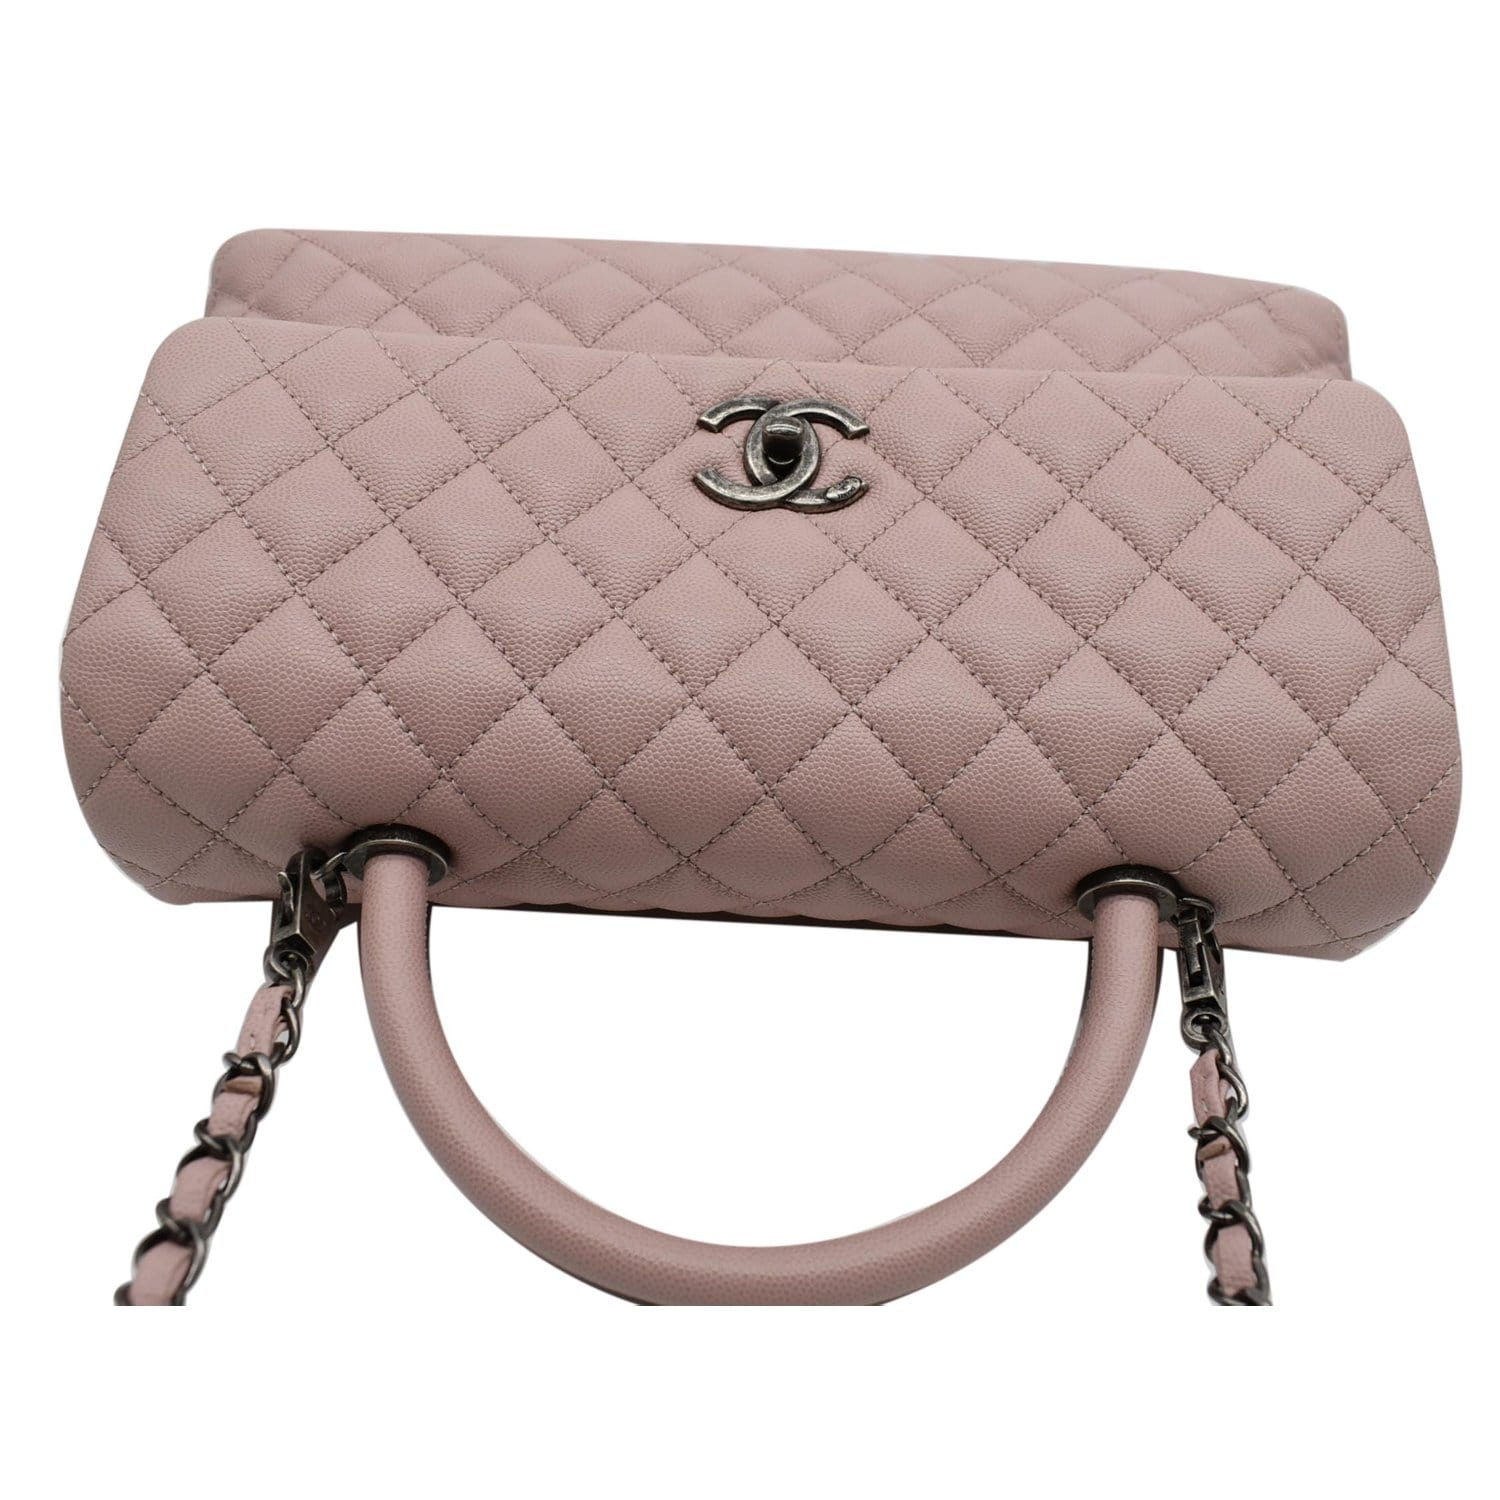 CHANEL Medium Coco Quilted Caviar Leather Top Handle Shoulder Bag Pink